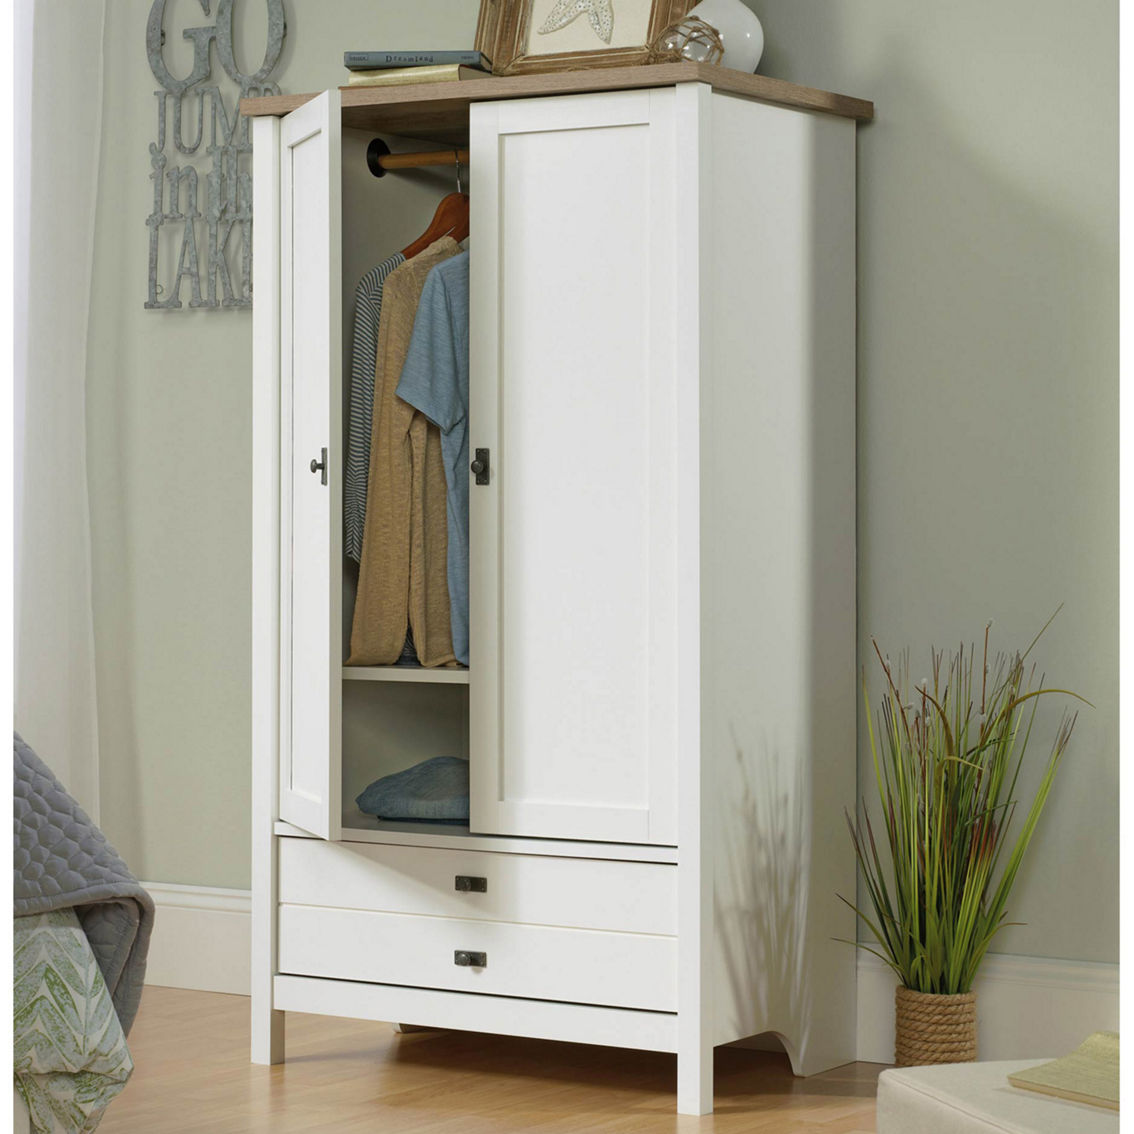 Sauder Cottage Road Armoire - Image 2 of 9